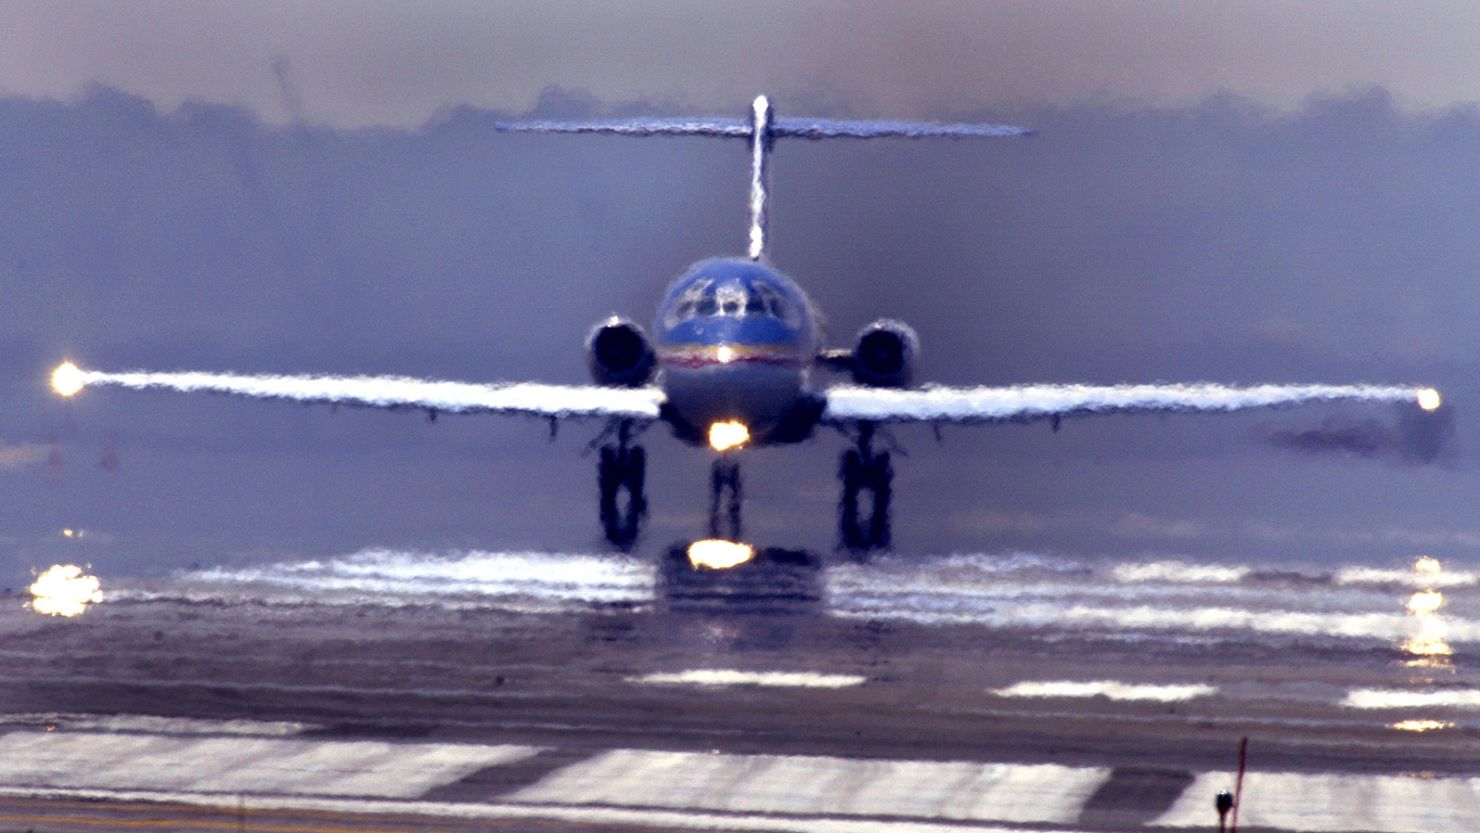 High temperatures and heat waves distort the image of a passenger jet as it taxis for take-off at Washington, DC's Ronald Reagan National Airport, 01 August 2002. (PAUL J. RICHARDS/AFP via Getty Images)